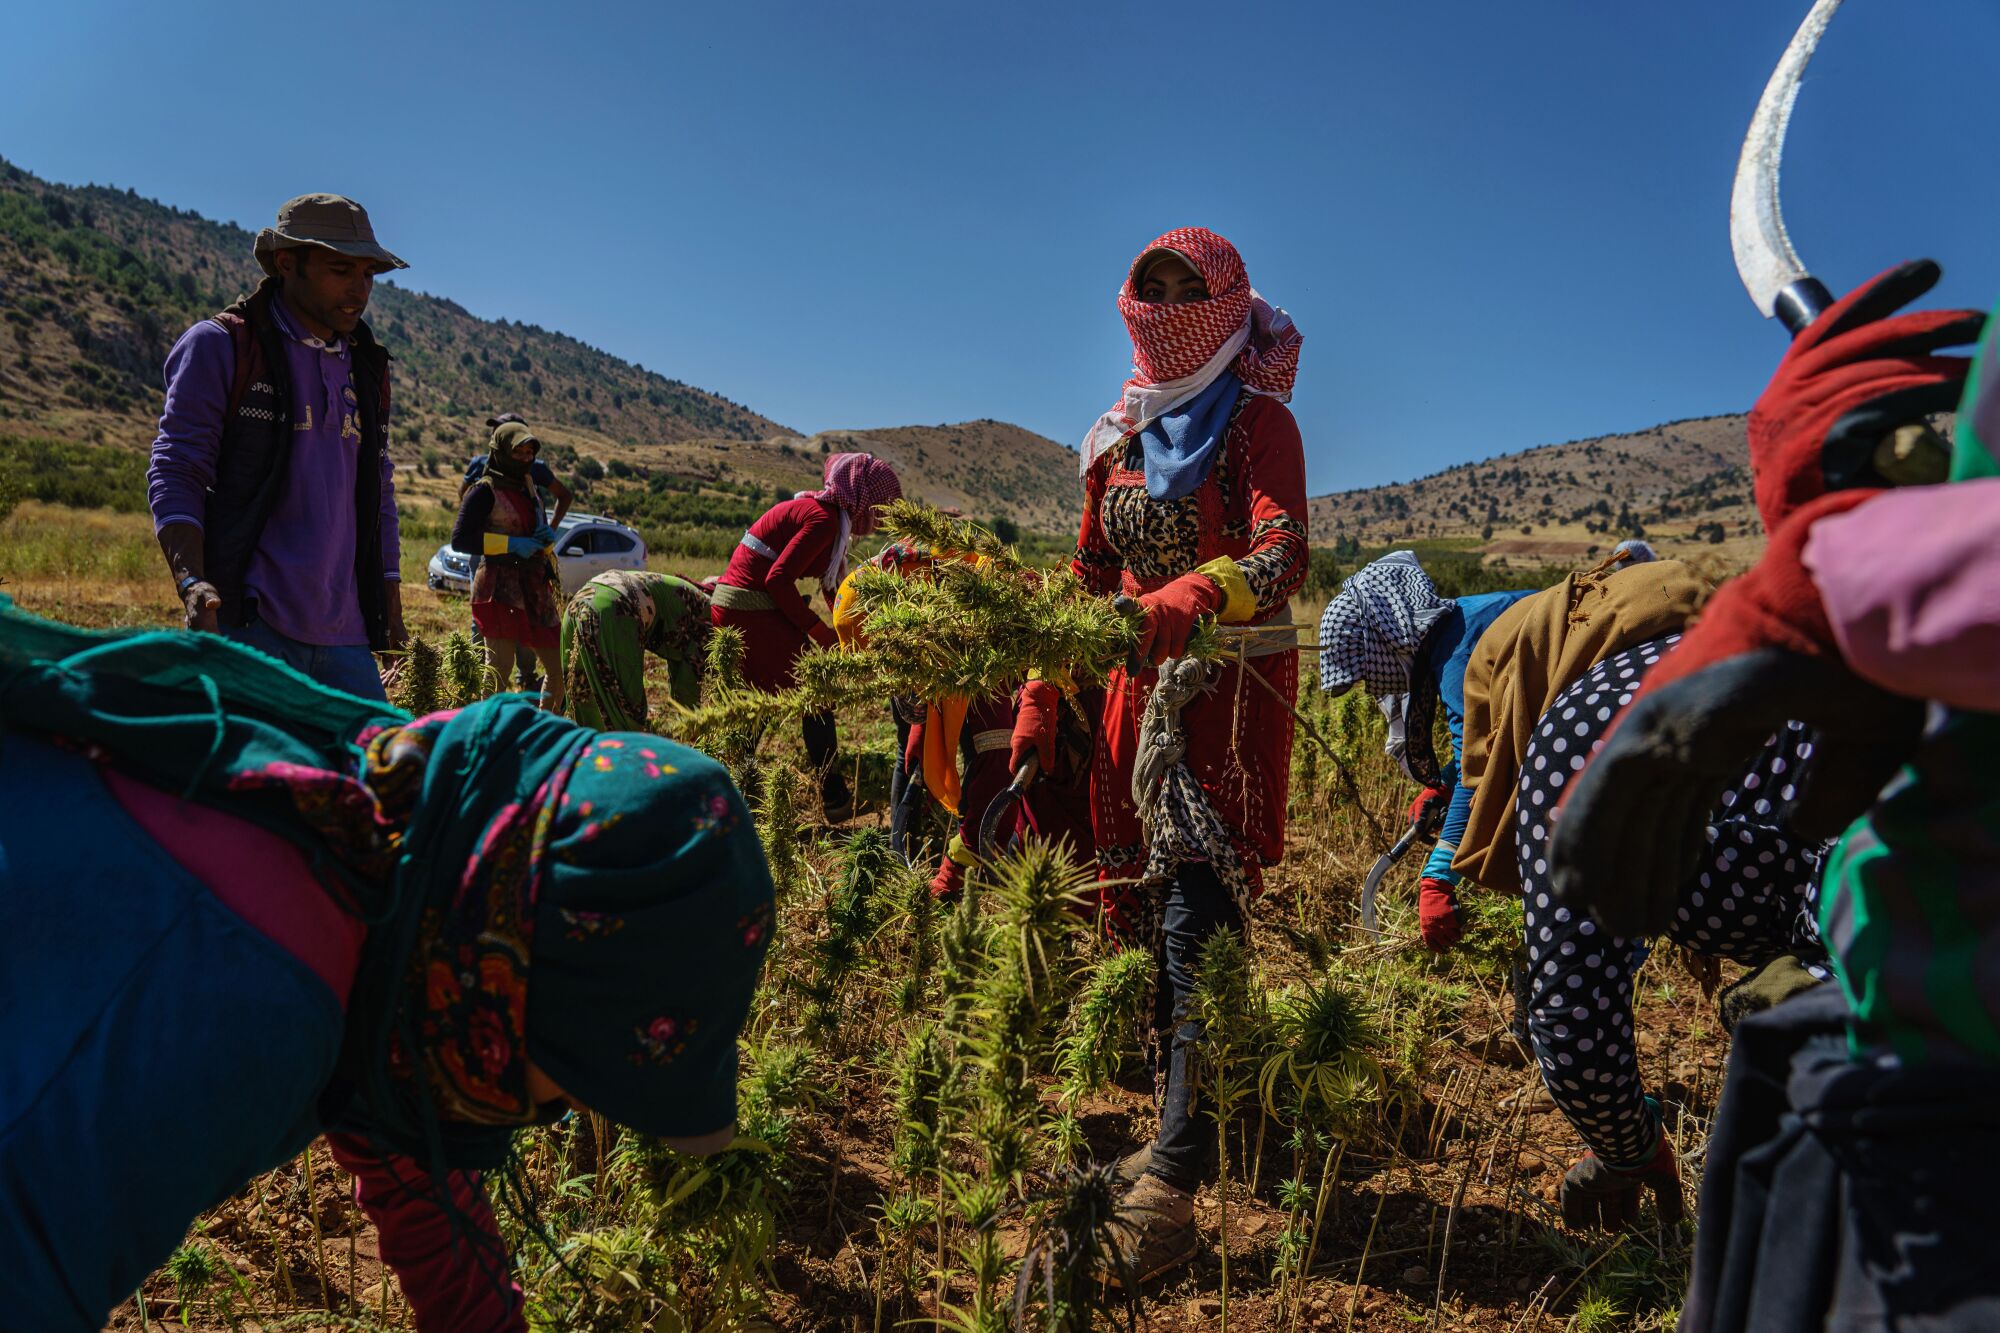 Armed with sickles, farmworkers harvest cannabis in the village of Yammouneh, Lebanon.